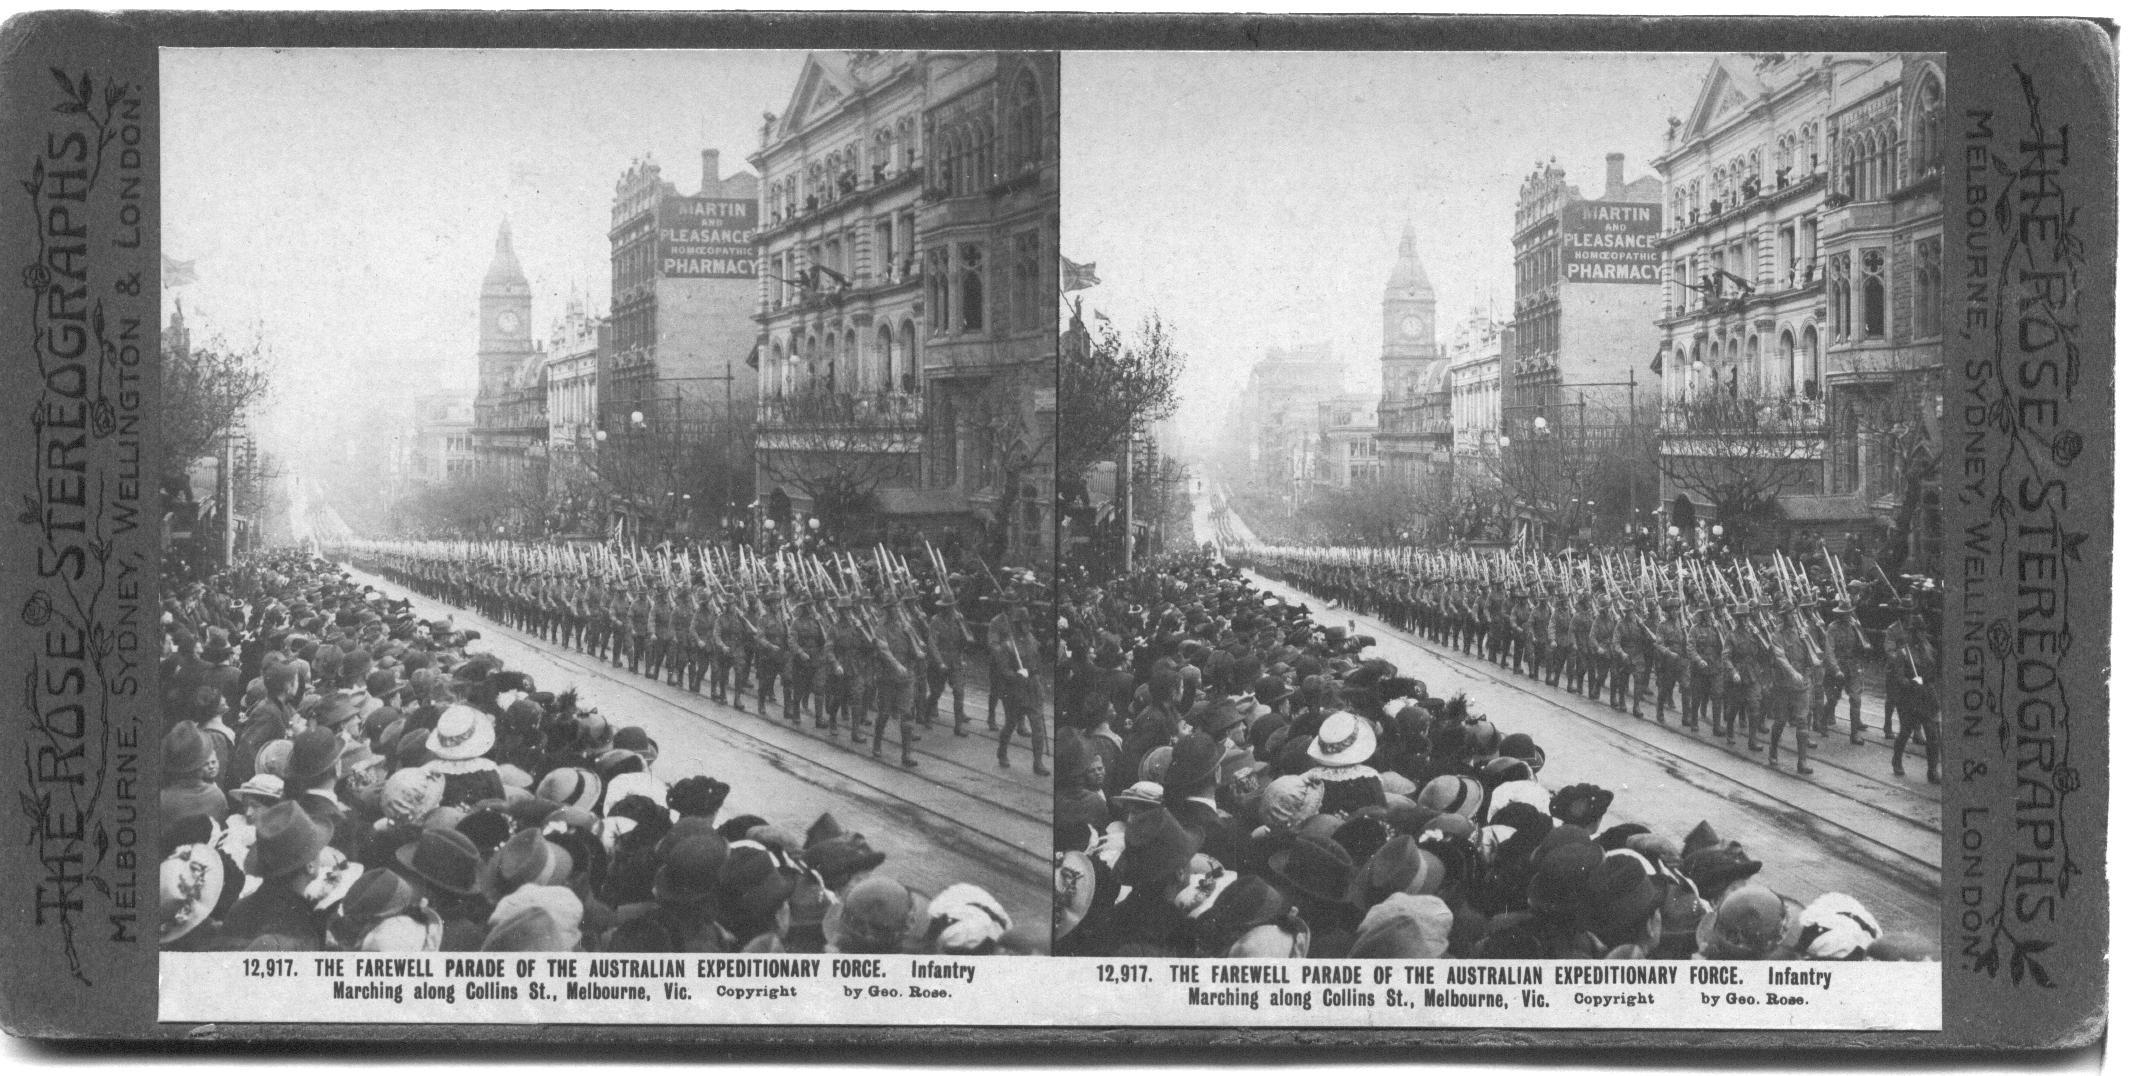 THE FAREWELL PARADE OF THE AUSTRALIAN EXPEDITIONARY FORCE. Infantry Marching along Collins Street, Melbourne, Vic.